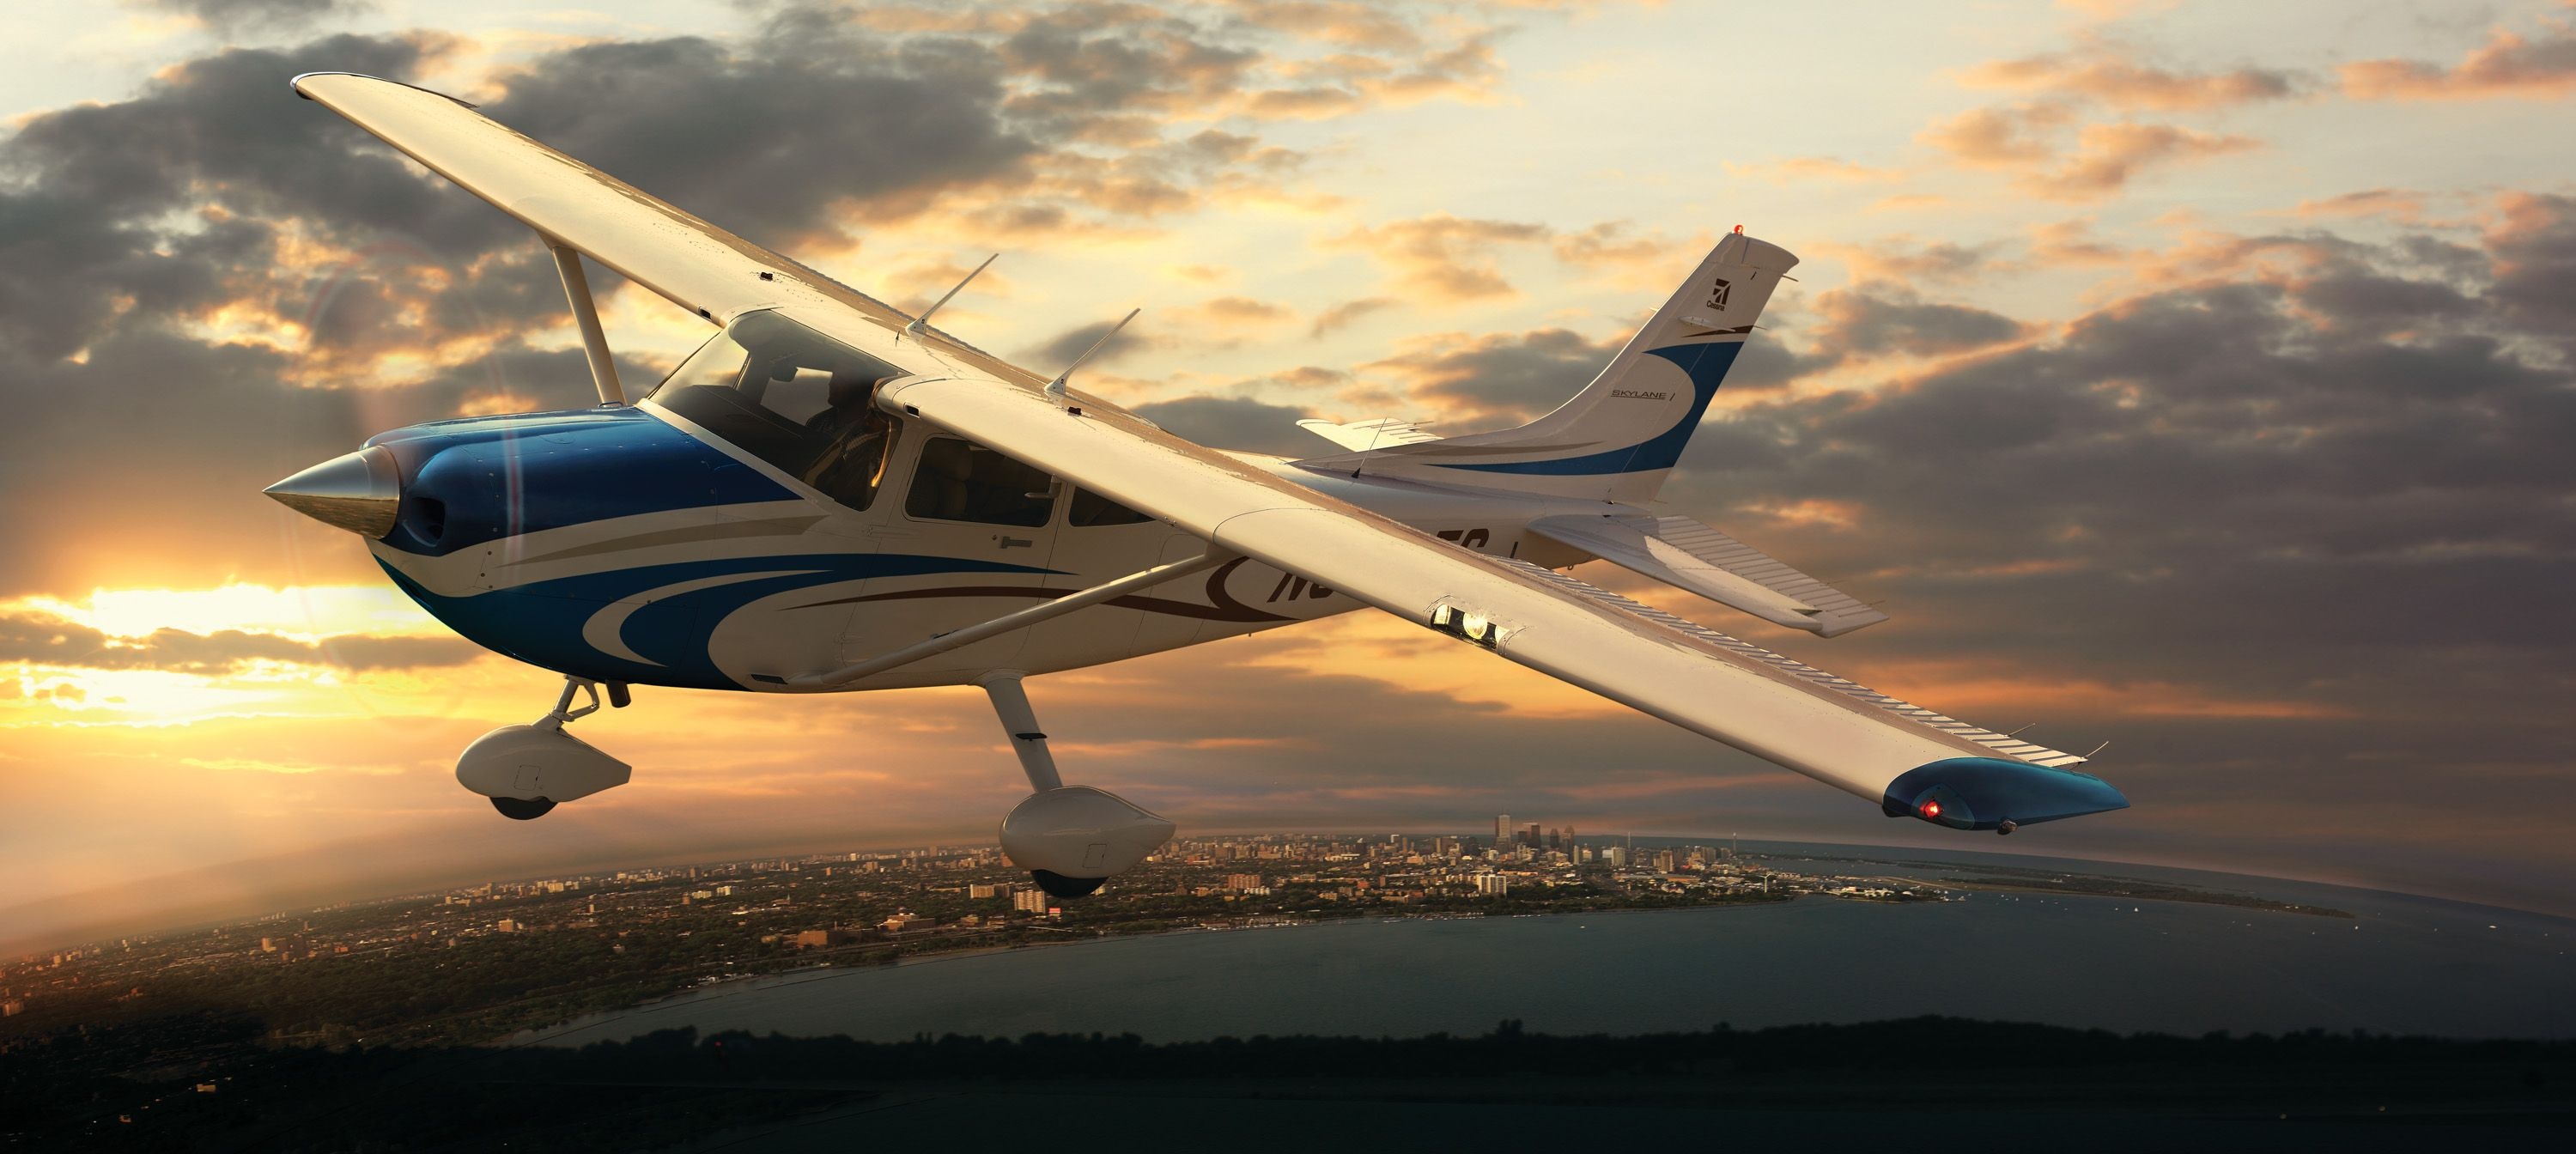 Cessna Wallpapers - Top Free Cessna Backgrounds 3000x1350